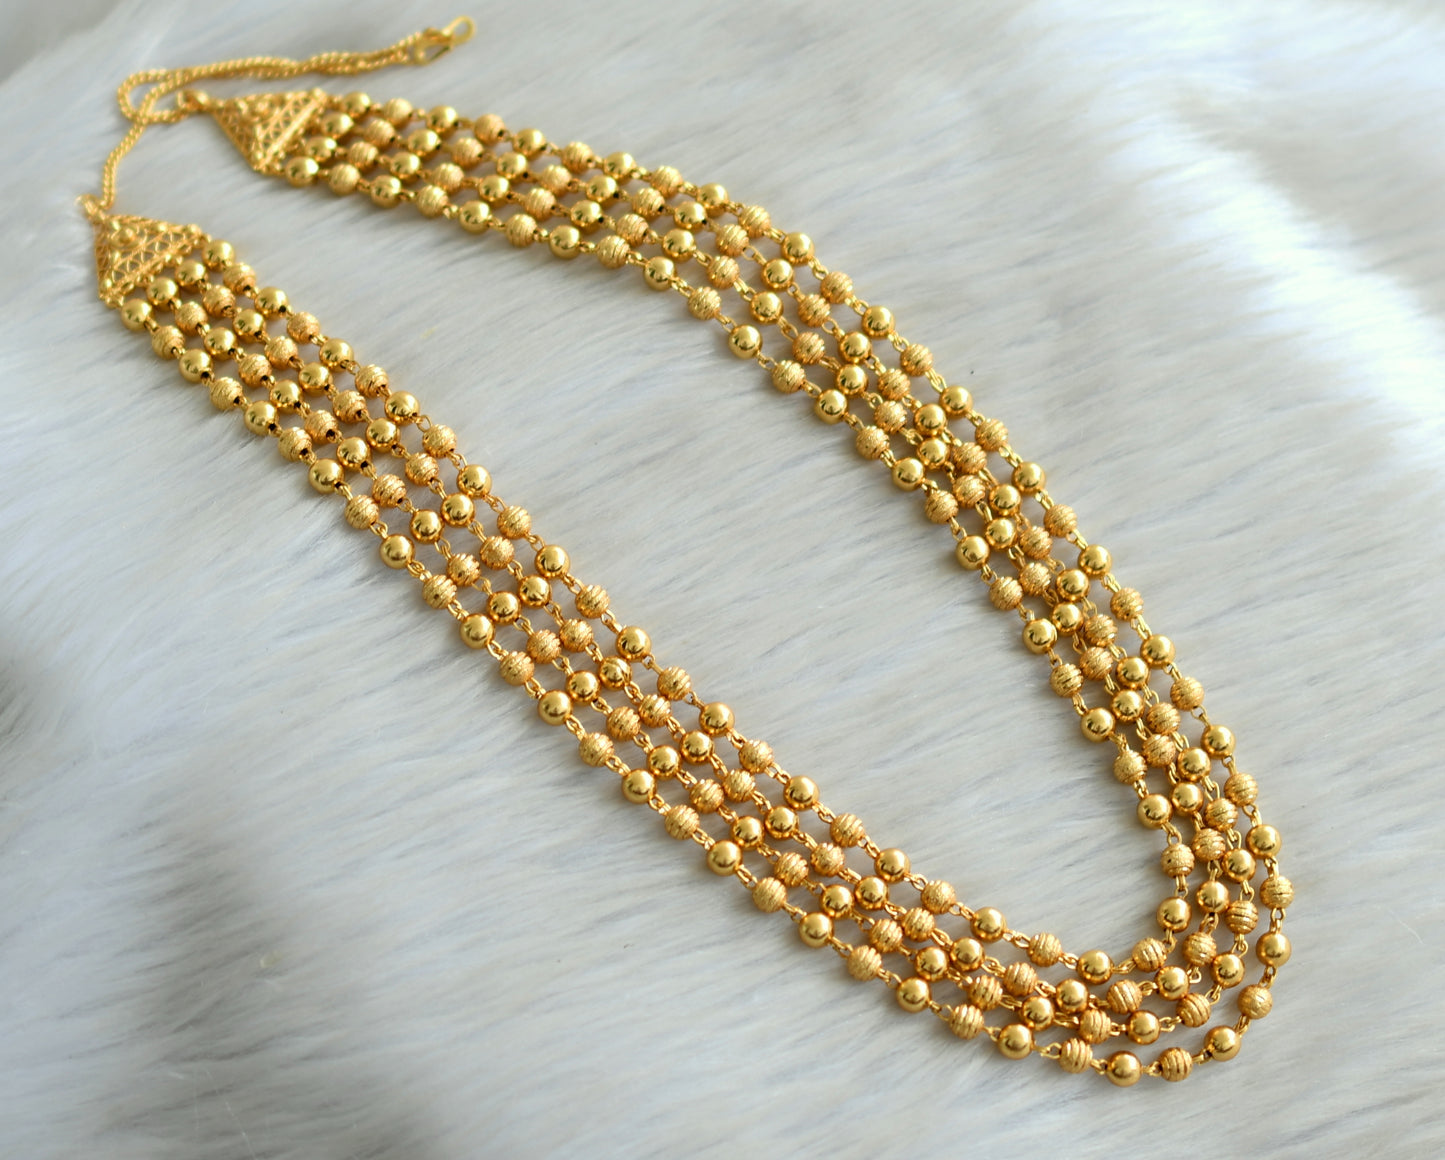 Gold tone multilayer ball chain/necklace dj-42885